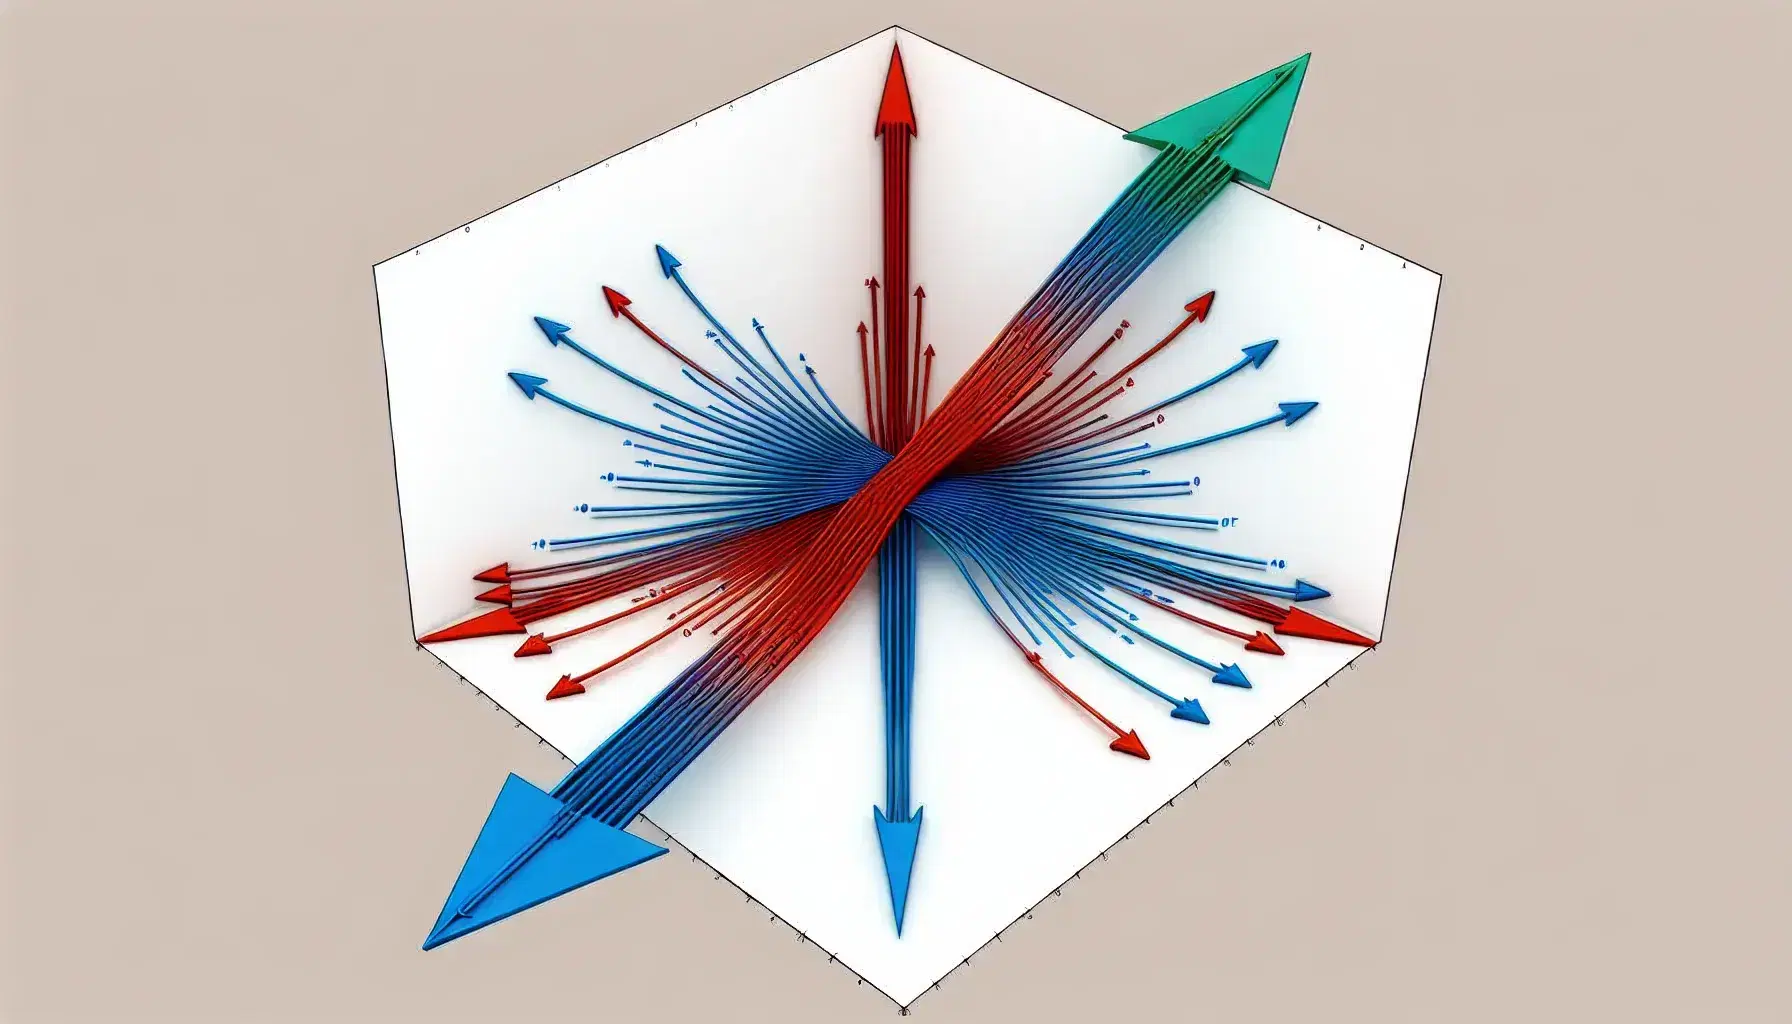 Three-dimensional vector diagram with red, blue, and green arrows originating from a common point, representing a vector operation in a white space.